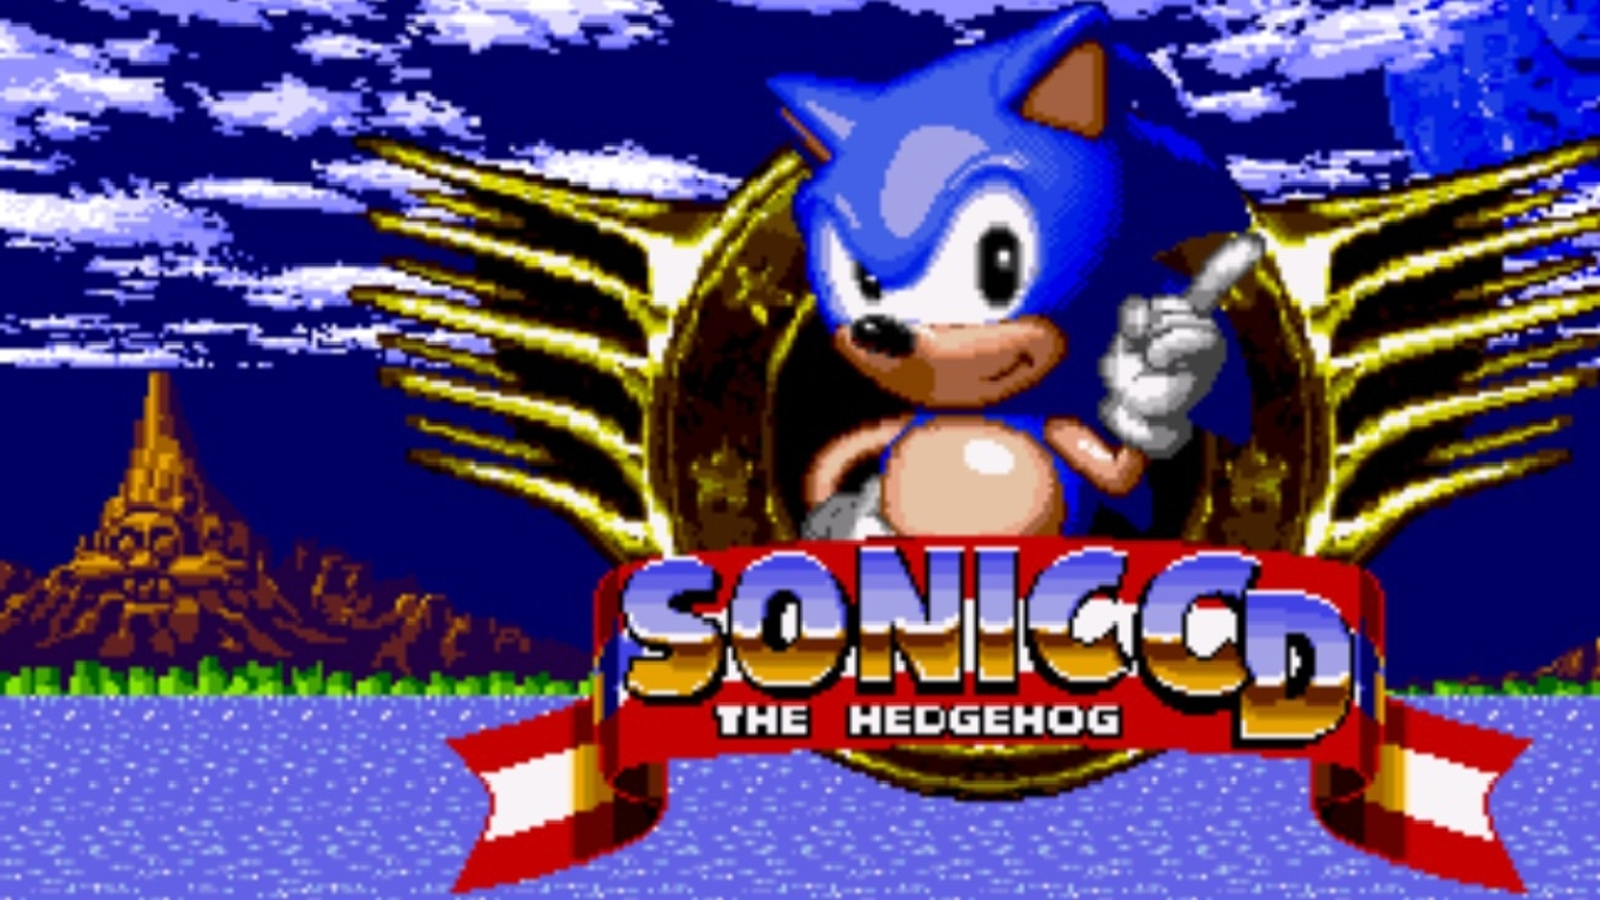 THE ORIGINS OF NEO METAL SONIC  Sonic the Hedgehog Theory 